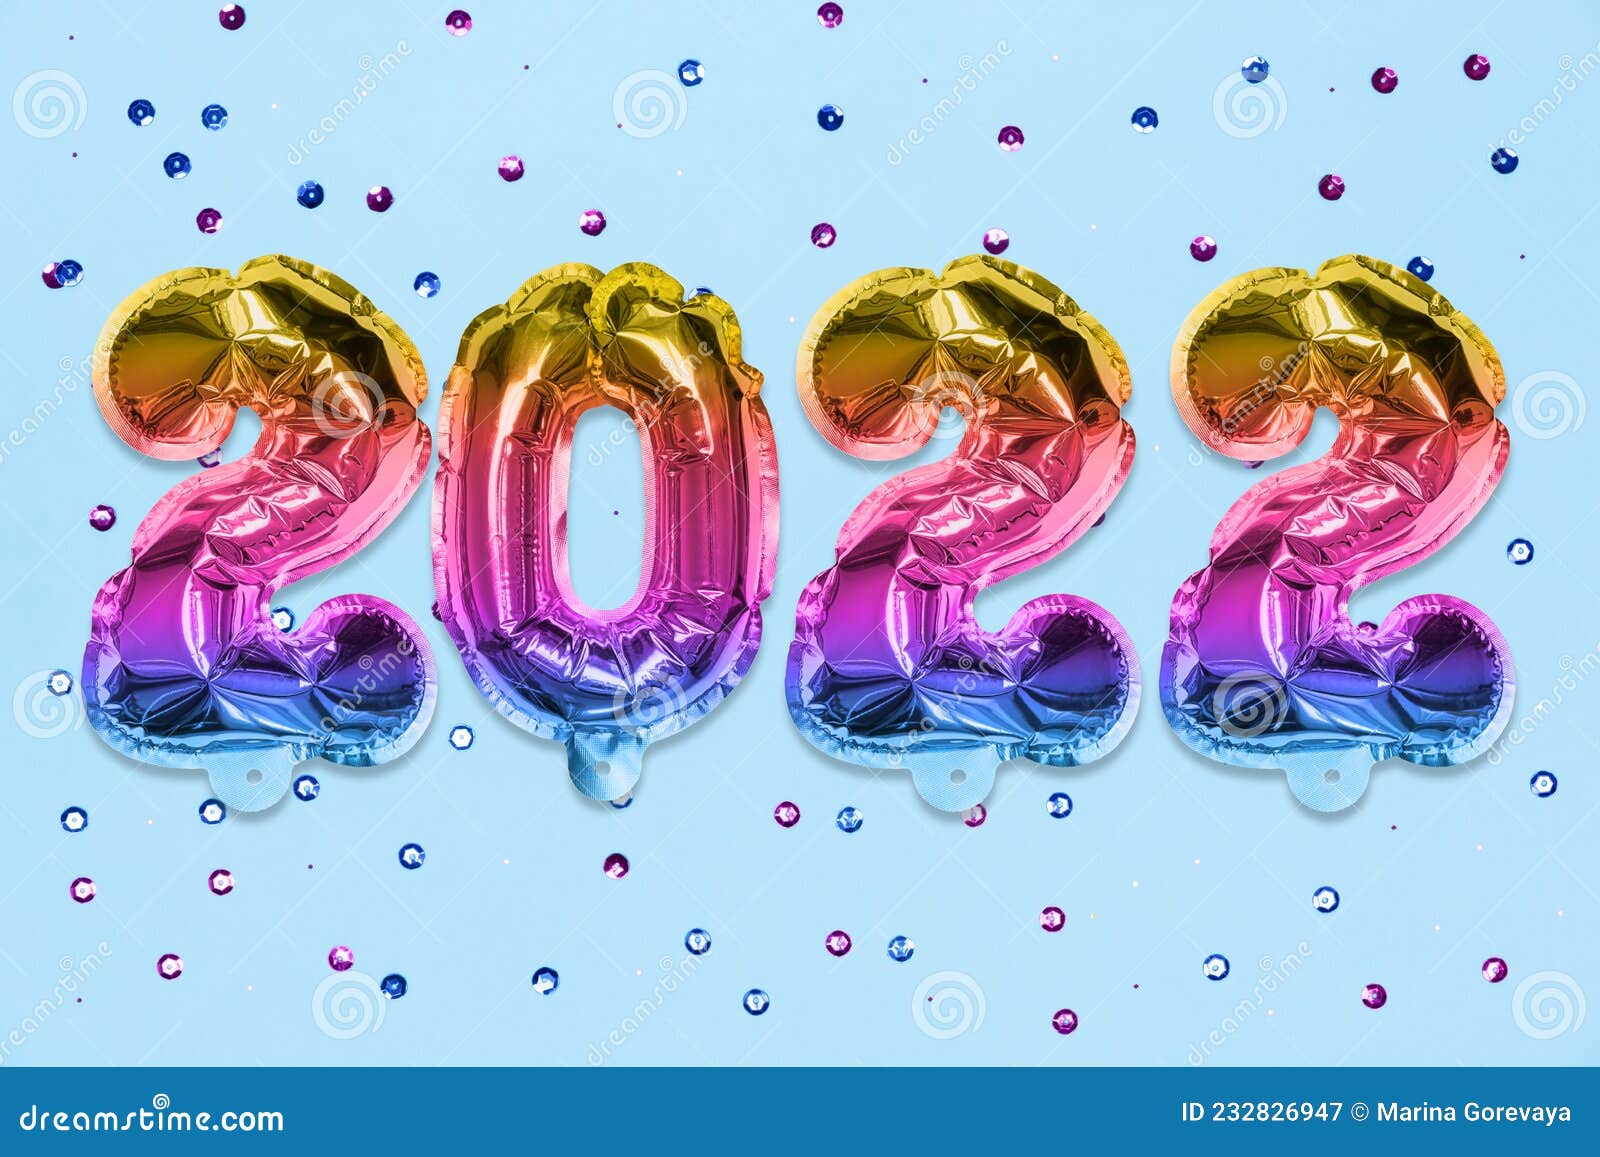 Rainbow Foil Balloon Number, Digit 2022 on a Blue Background with 